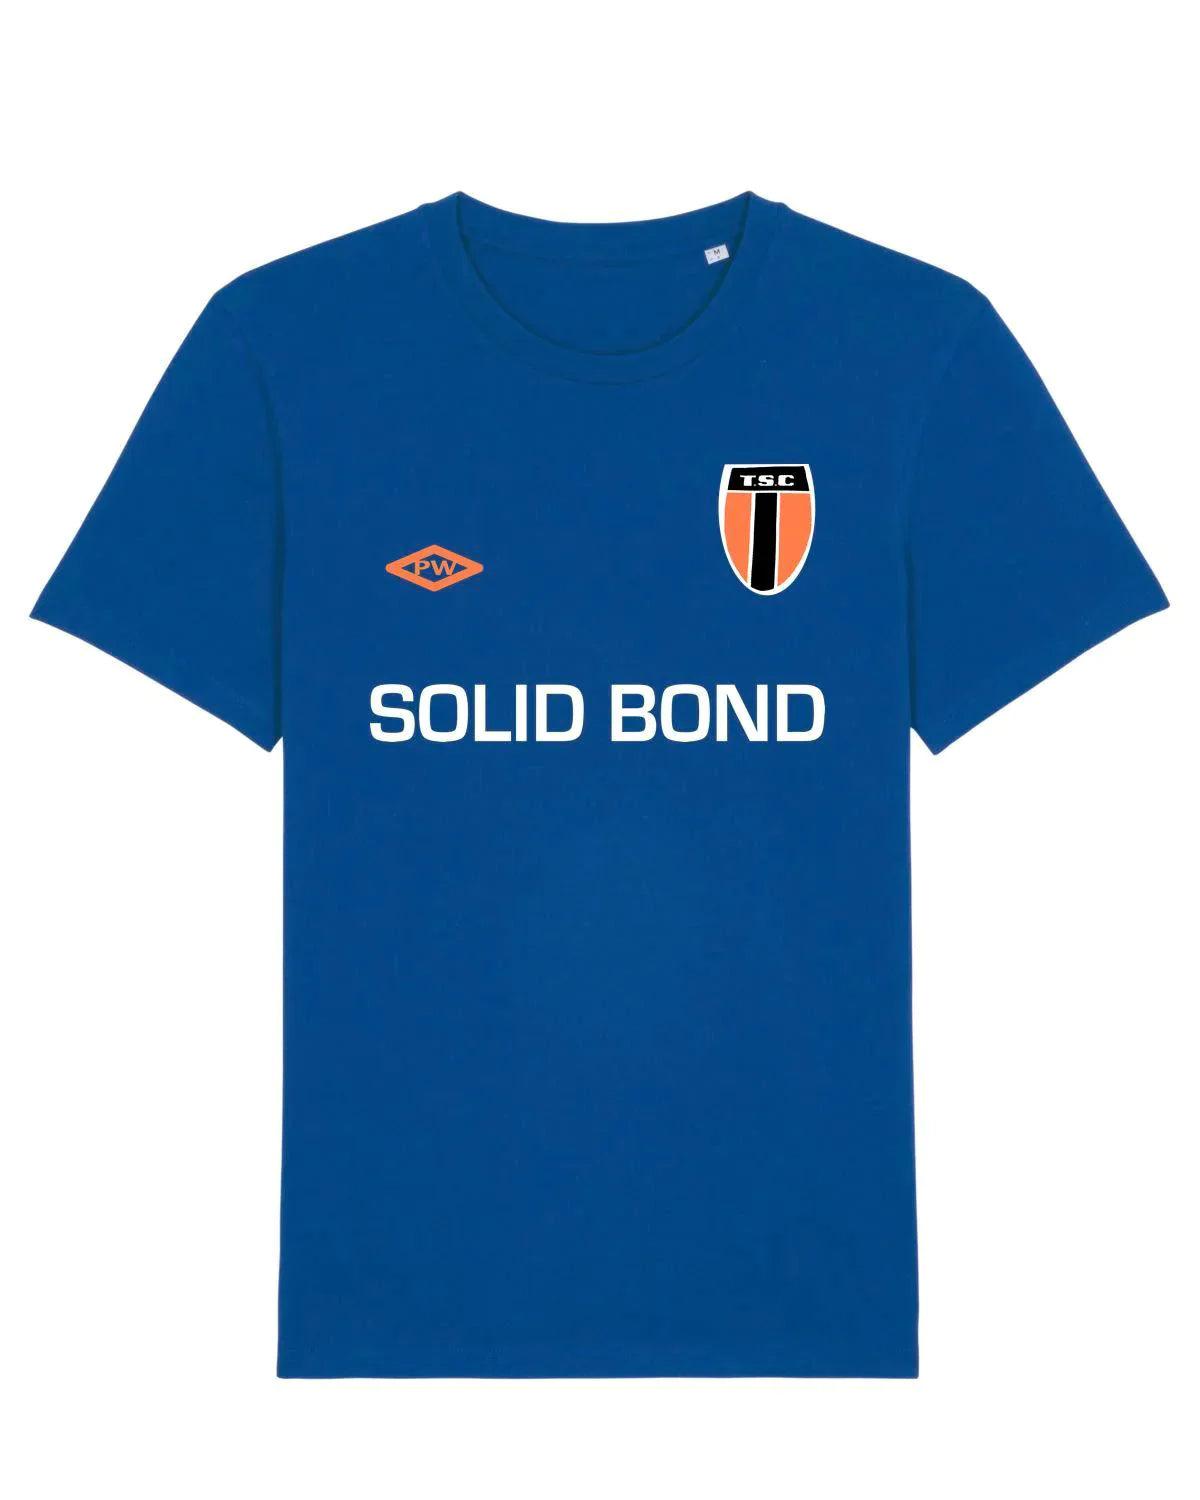 SOLID BOND: T-Shirt Inspired by The Style Council & Football (2 Colours) - SOUND IS COLOUR